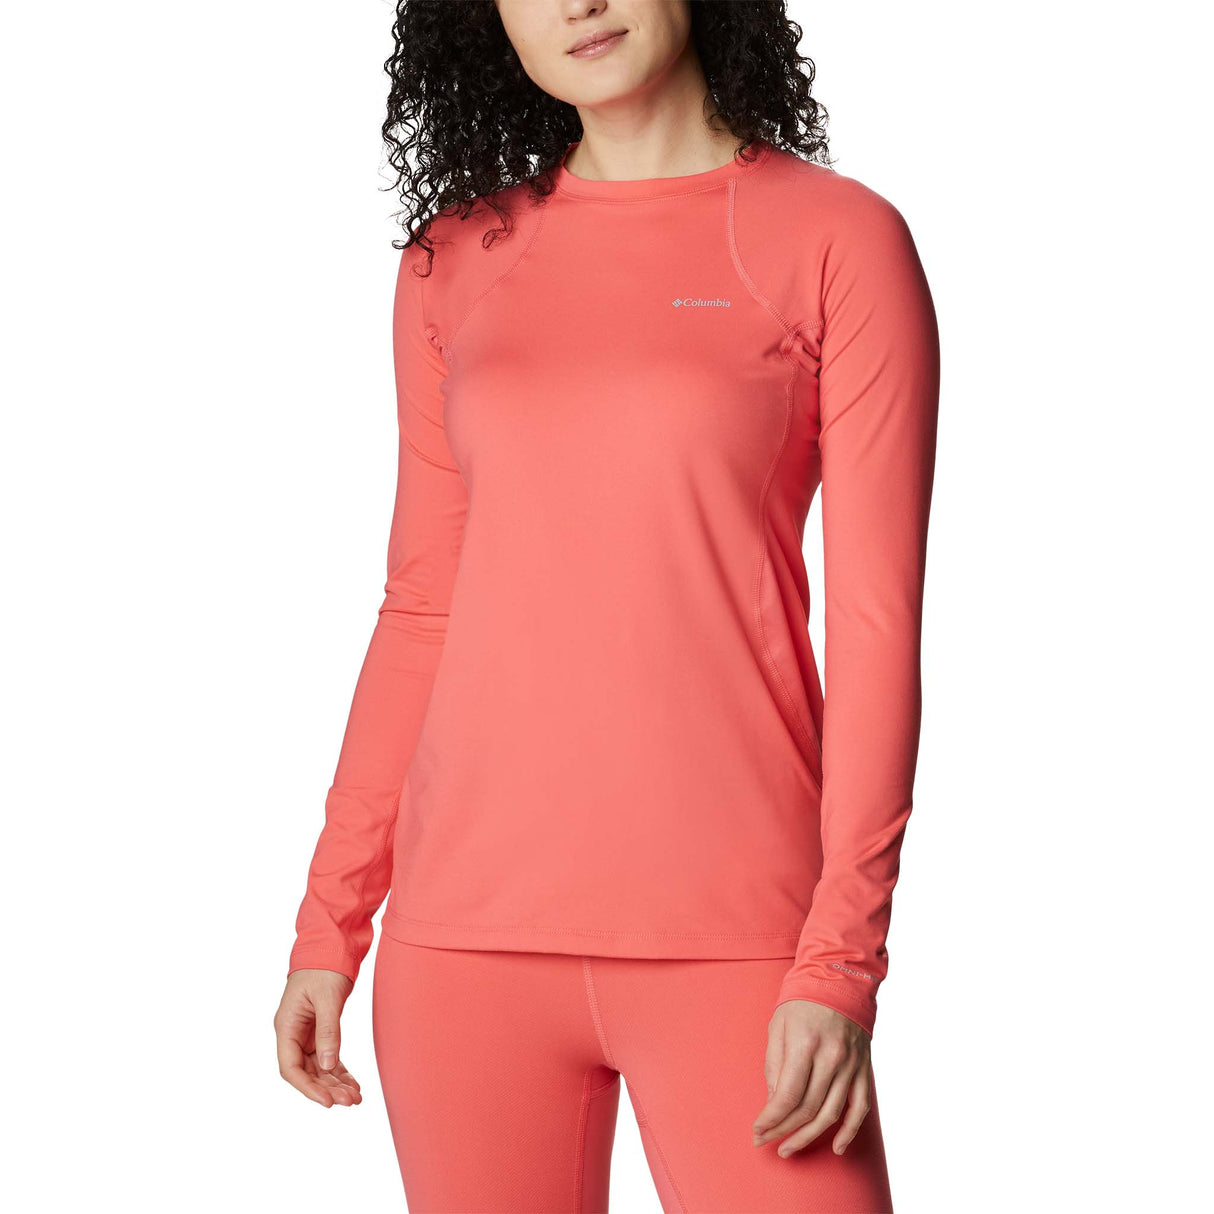 Columbia Midweight Stretch haut a manches longues sport femme blush pink face